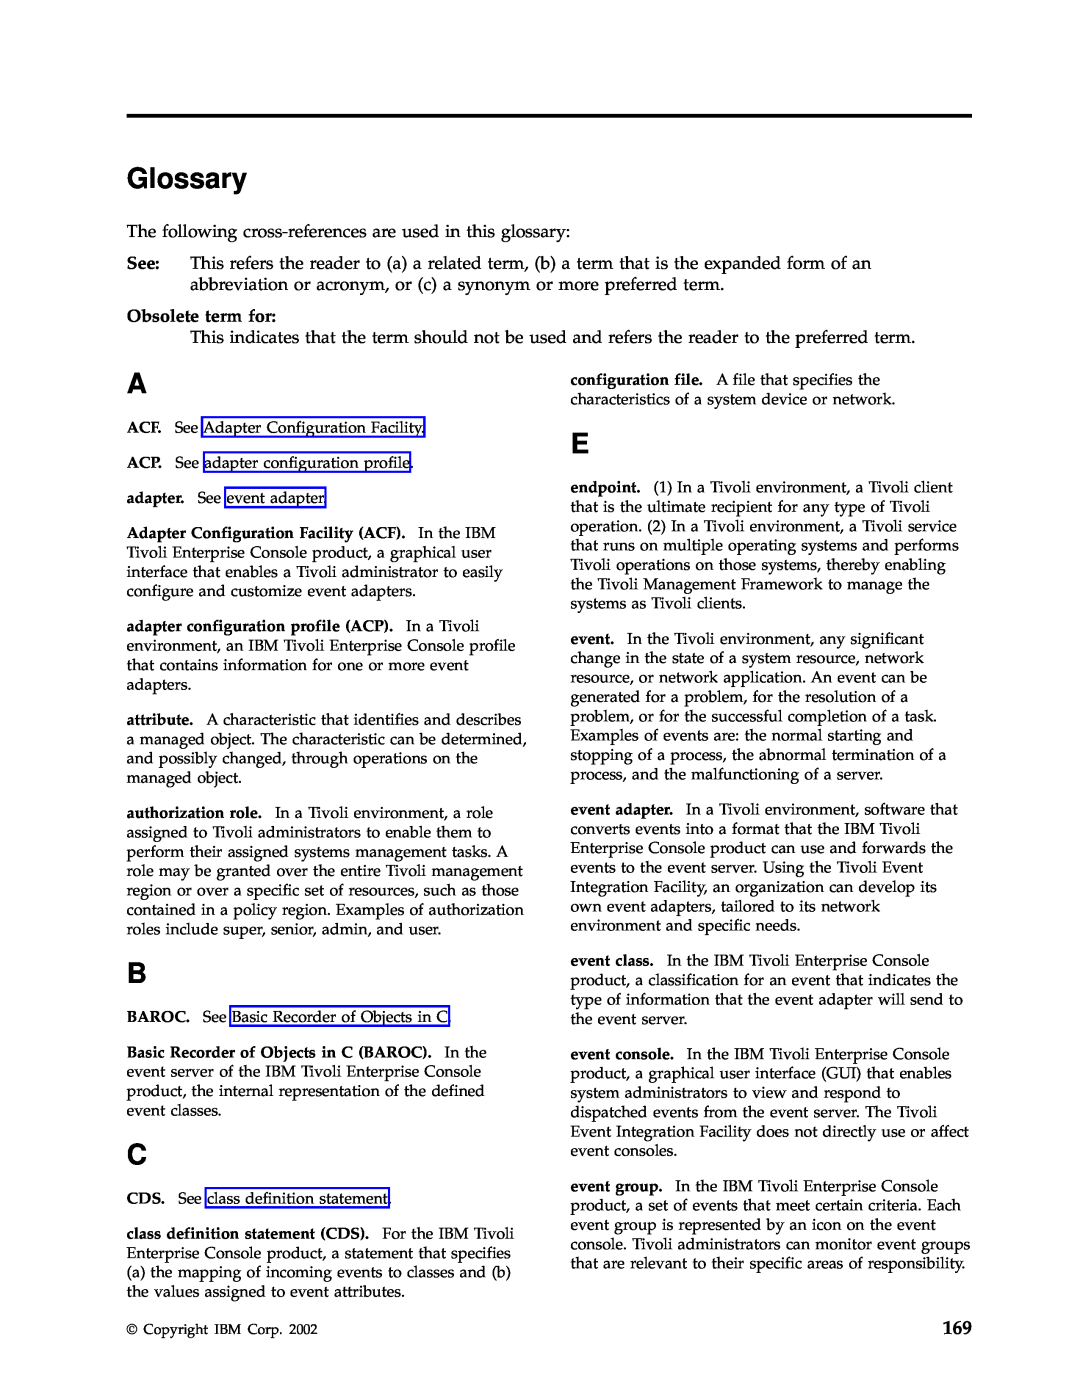 IBM Enterprise Console manual Glossary, Obsolete term for 